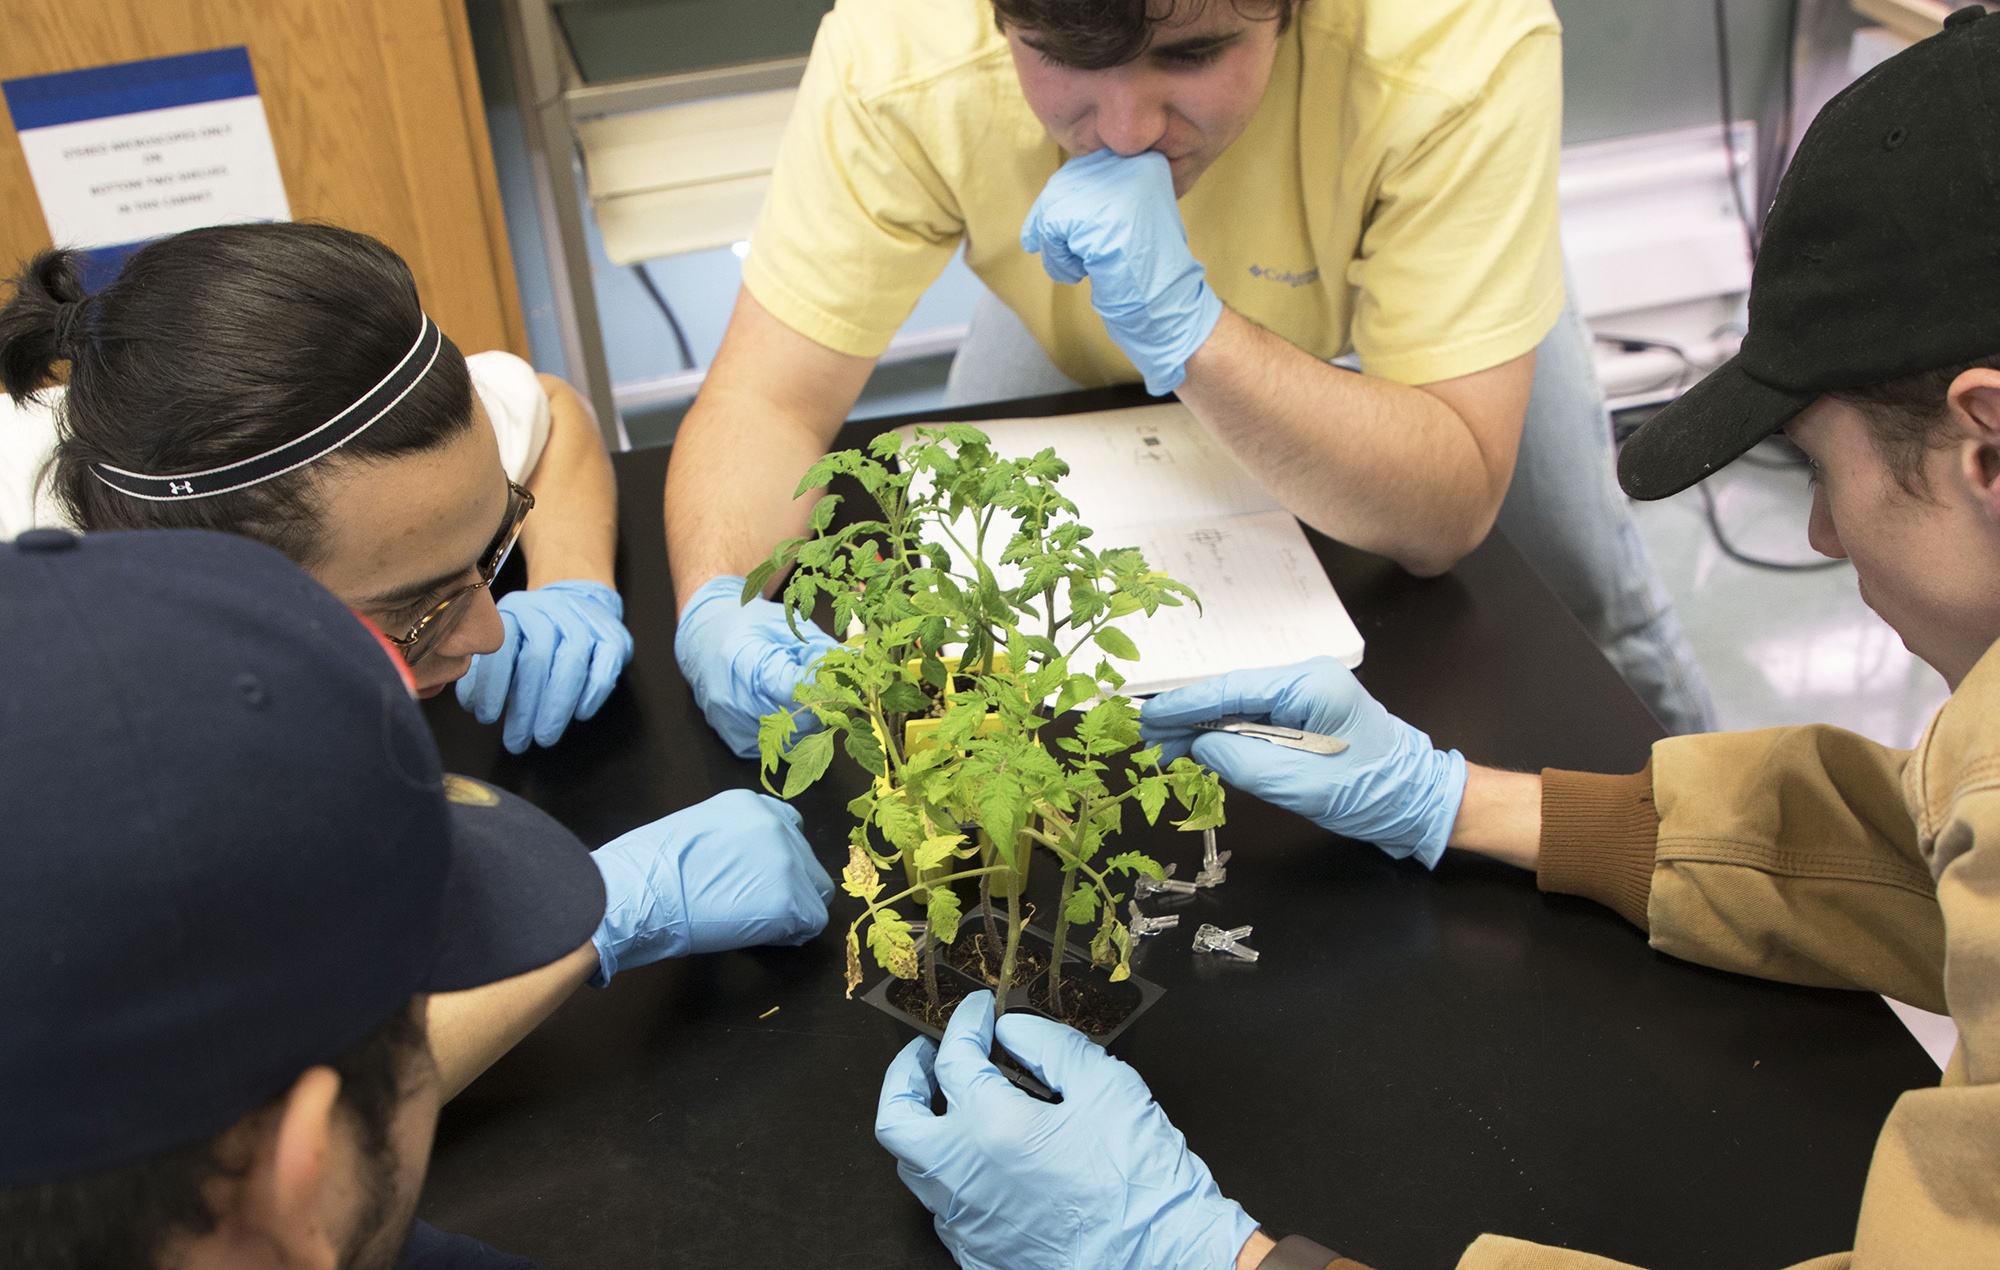 Students studying a plant in class